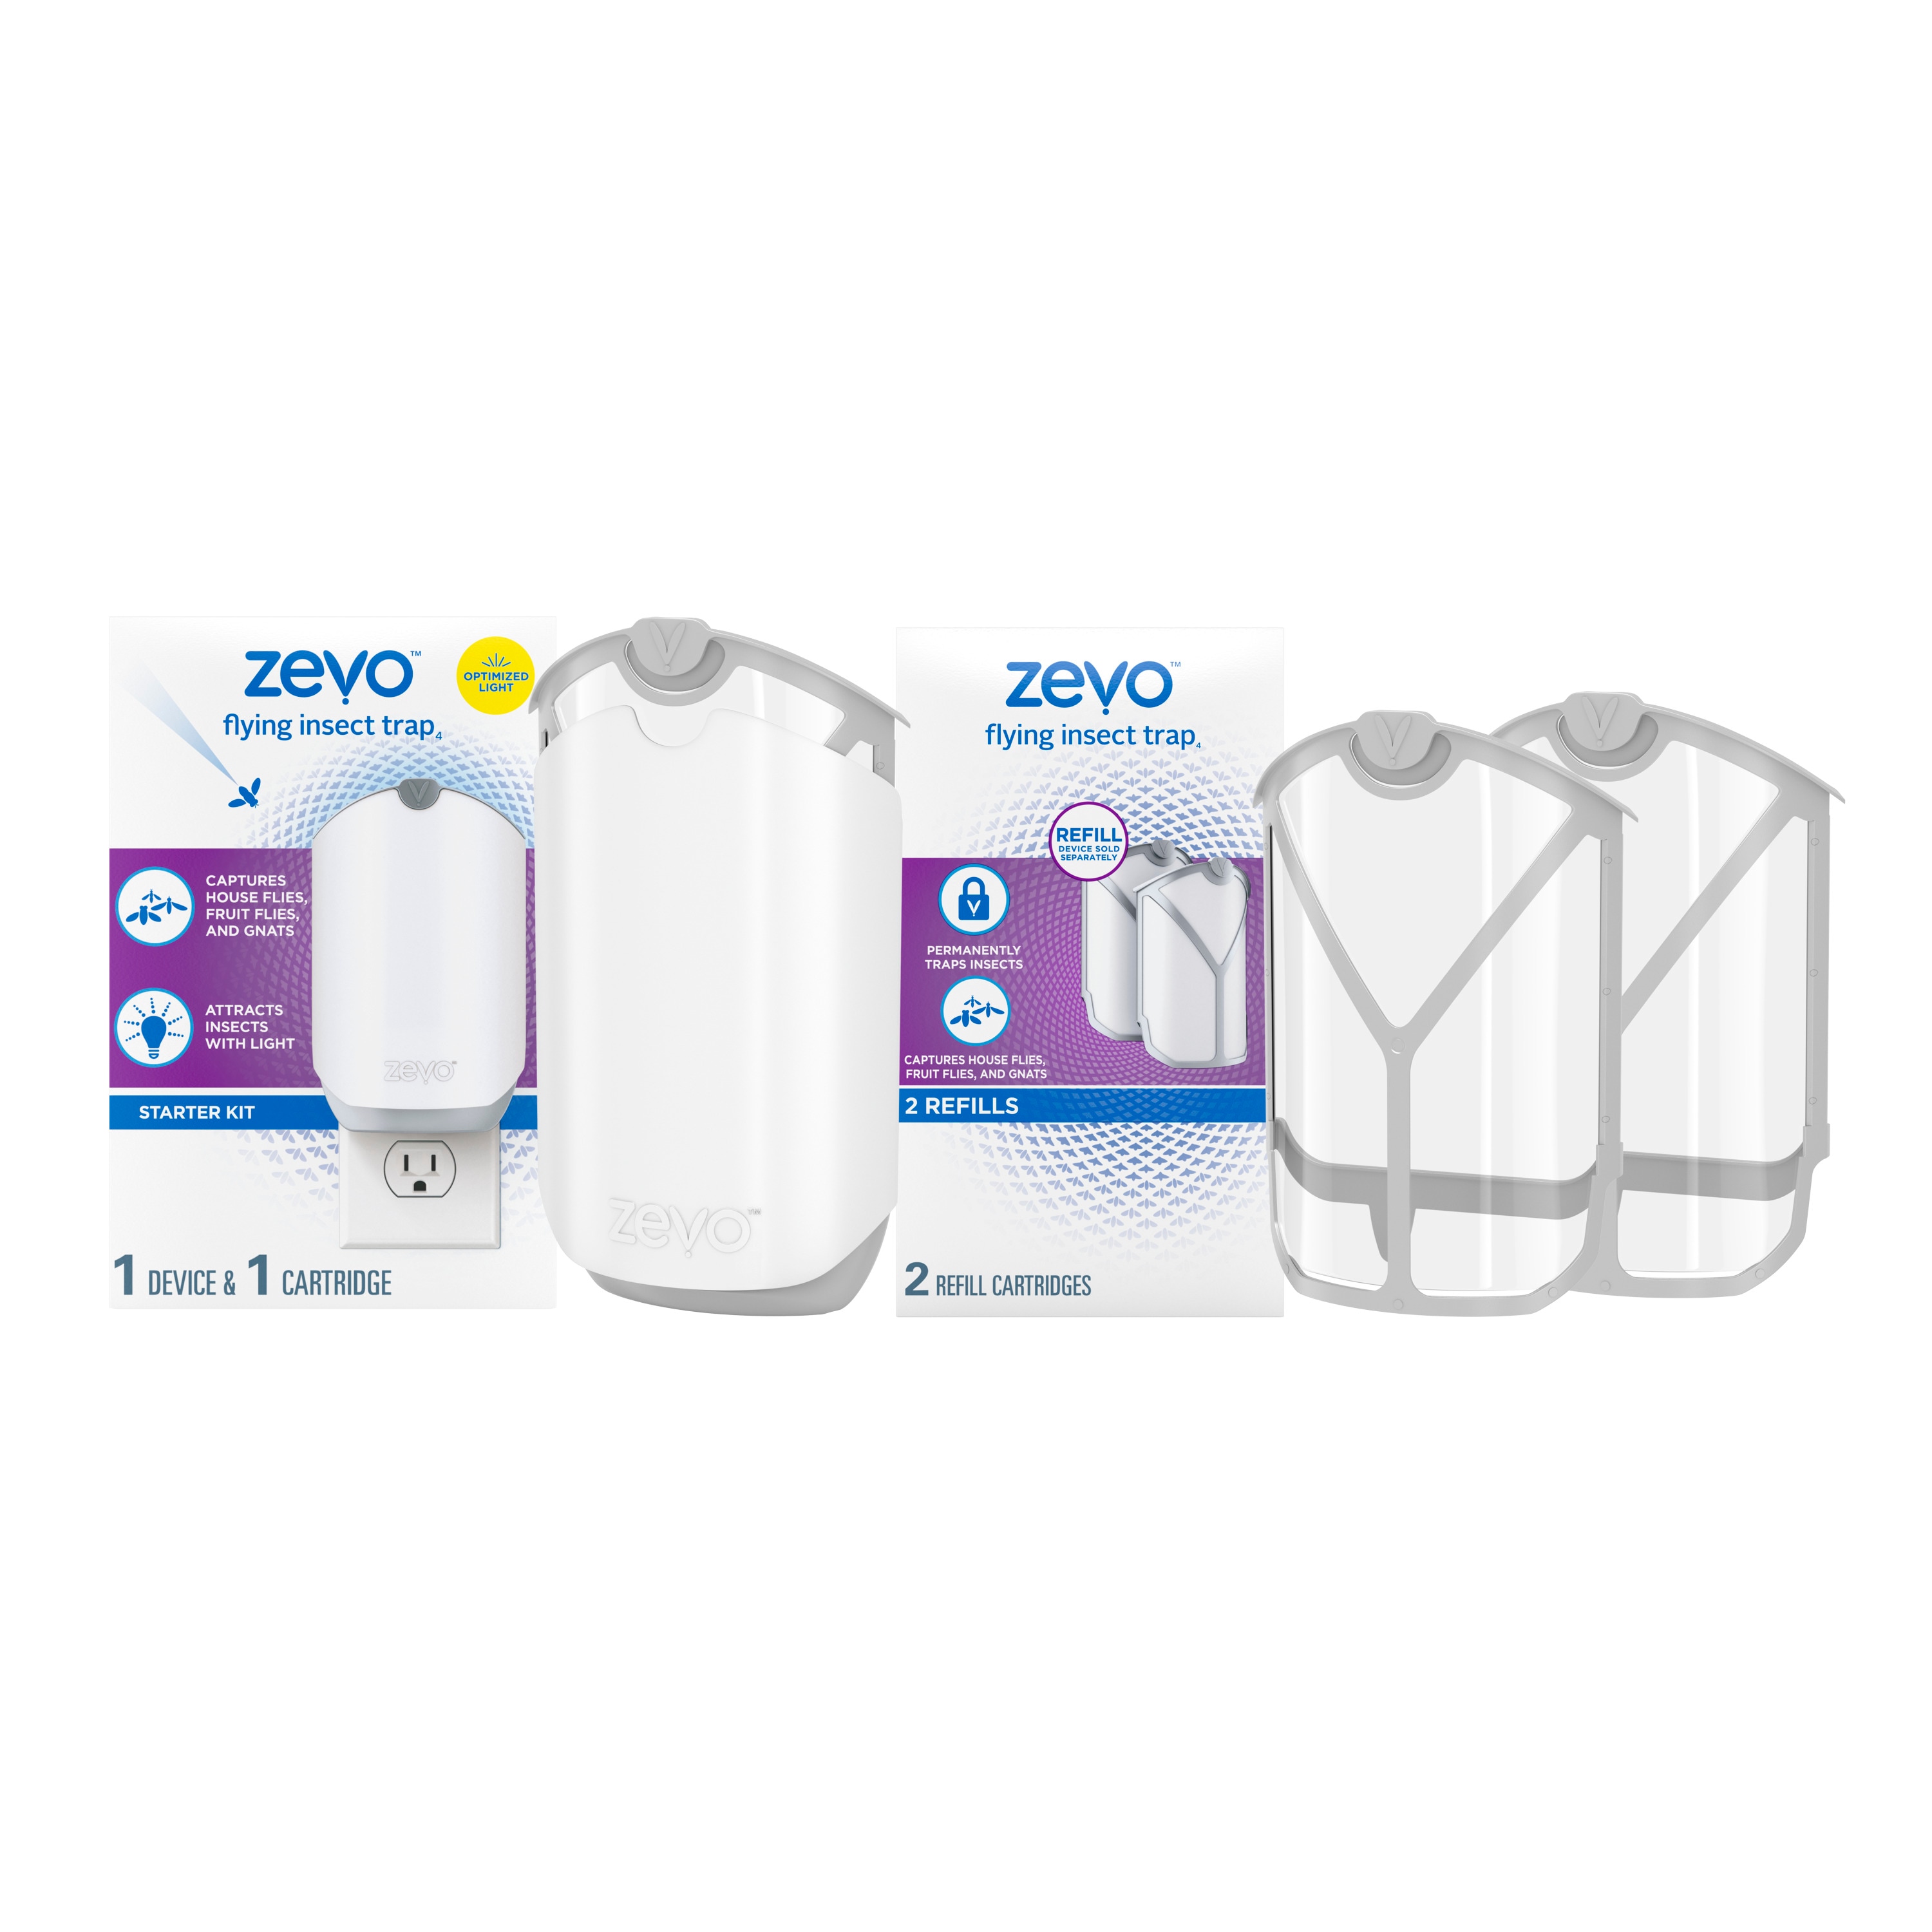 Zevo Flying Insect Trap Starter Kit, 2 Devices + 6 Refills for Sale in  Upland, CA - OfferUp